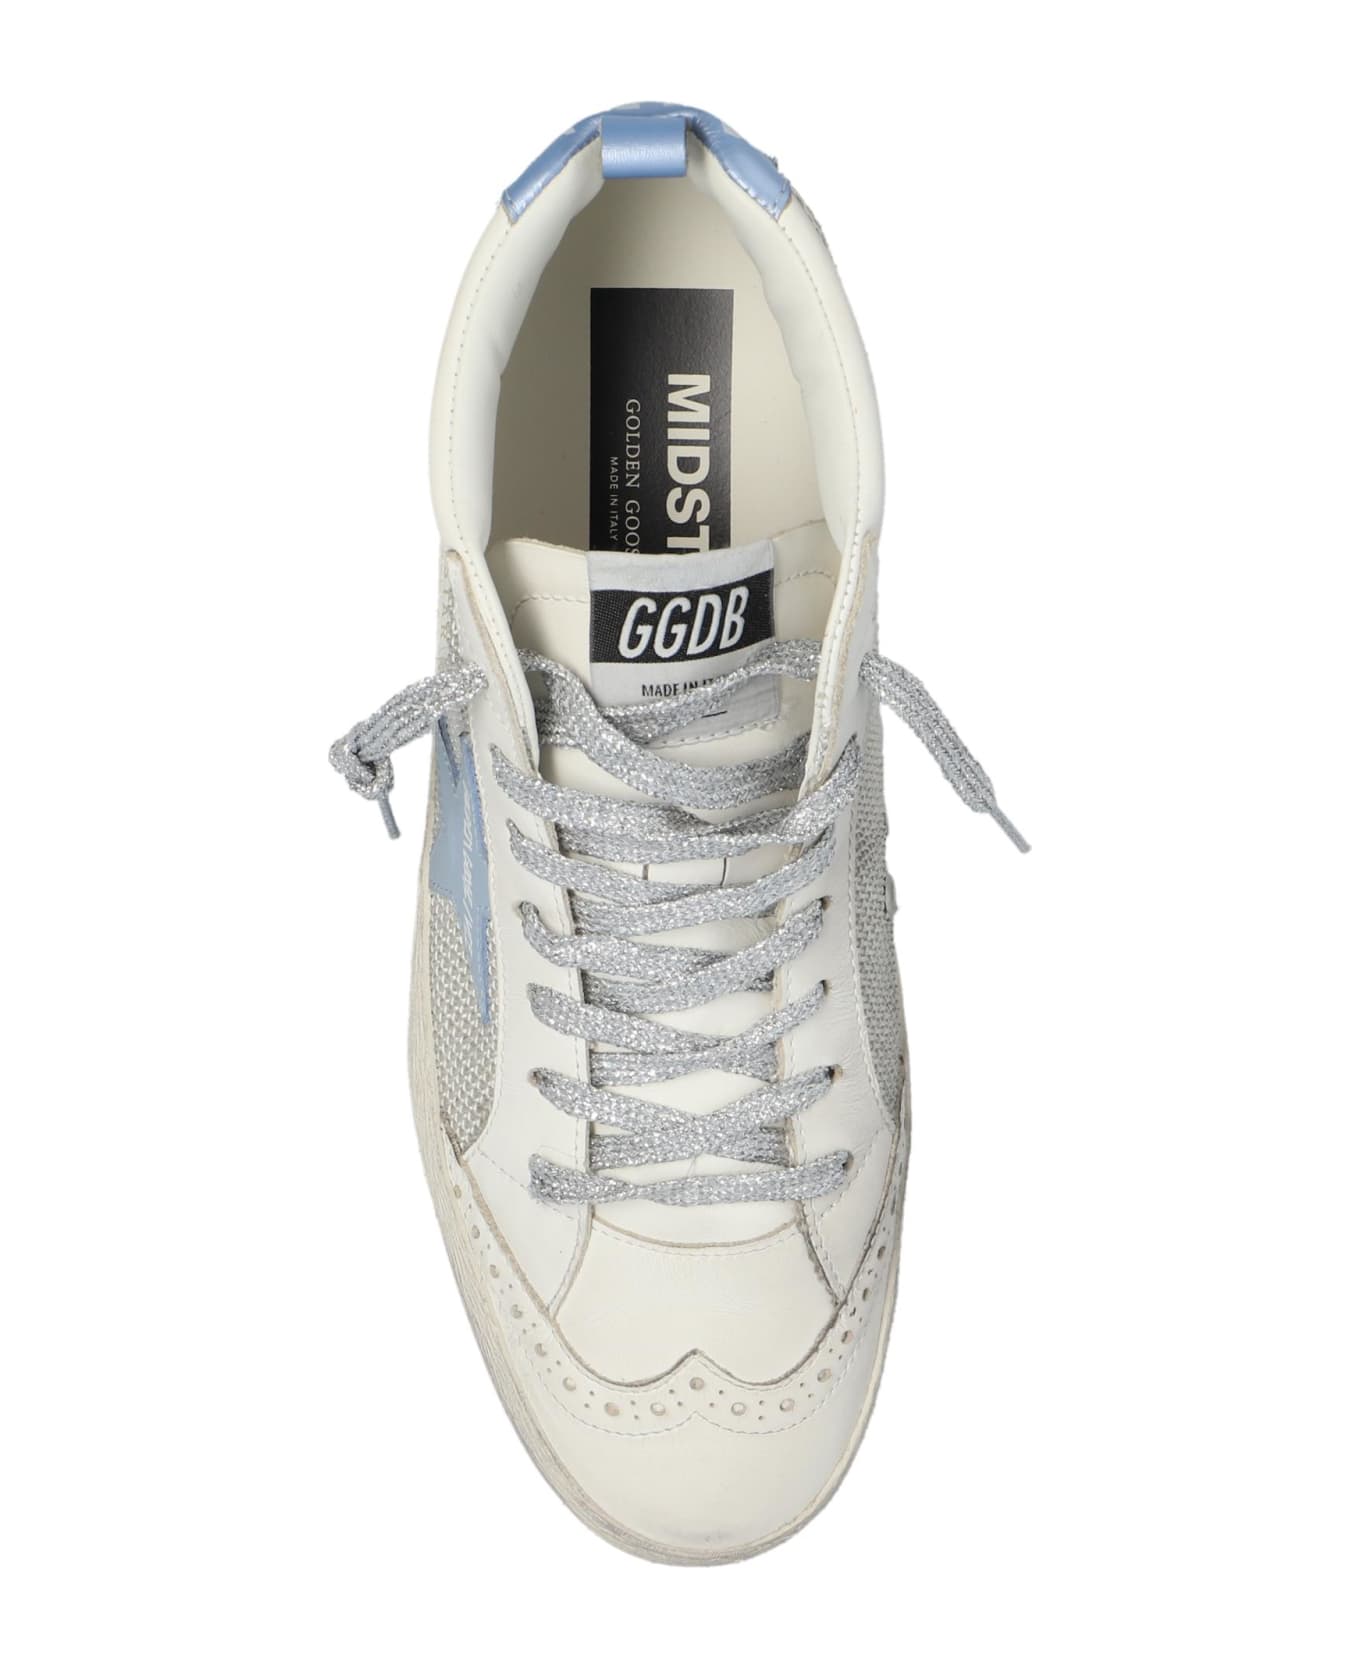 Golden Goose Mid Star Classic High-top Sneakers - White